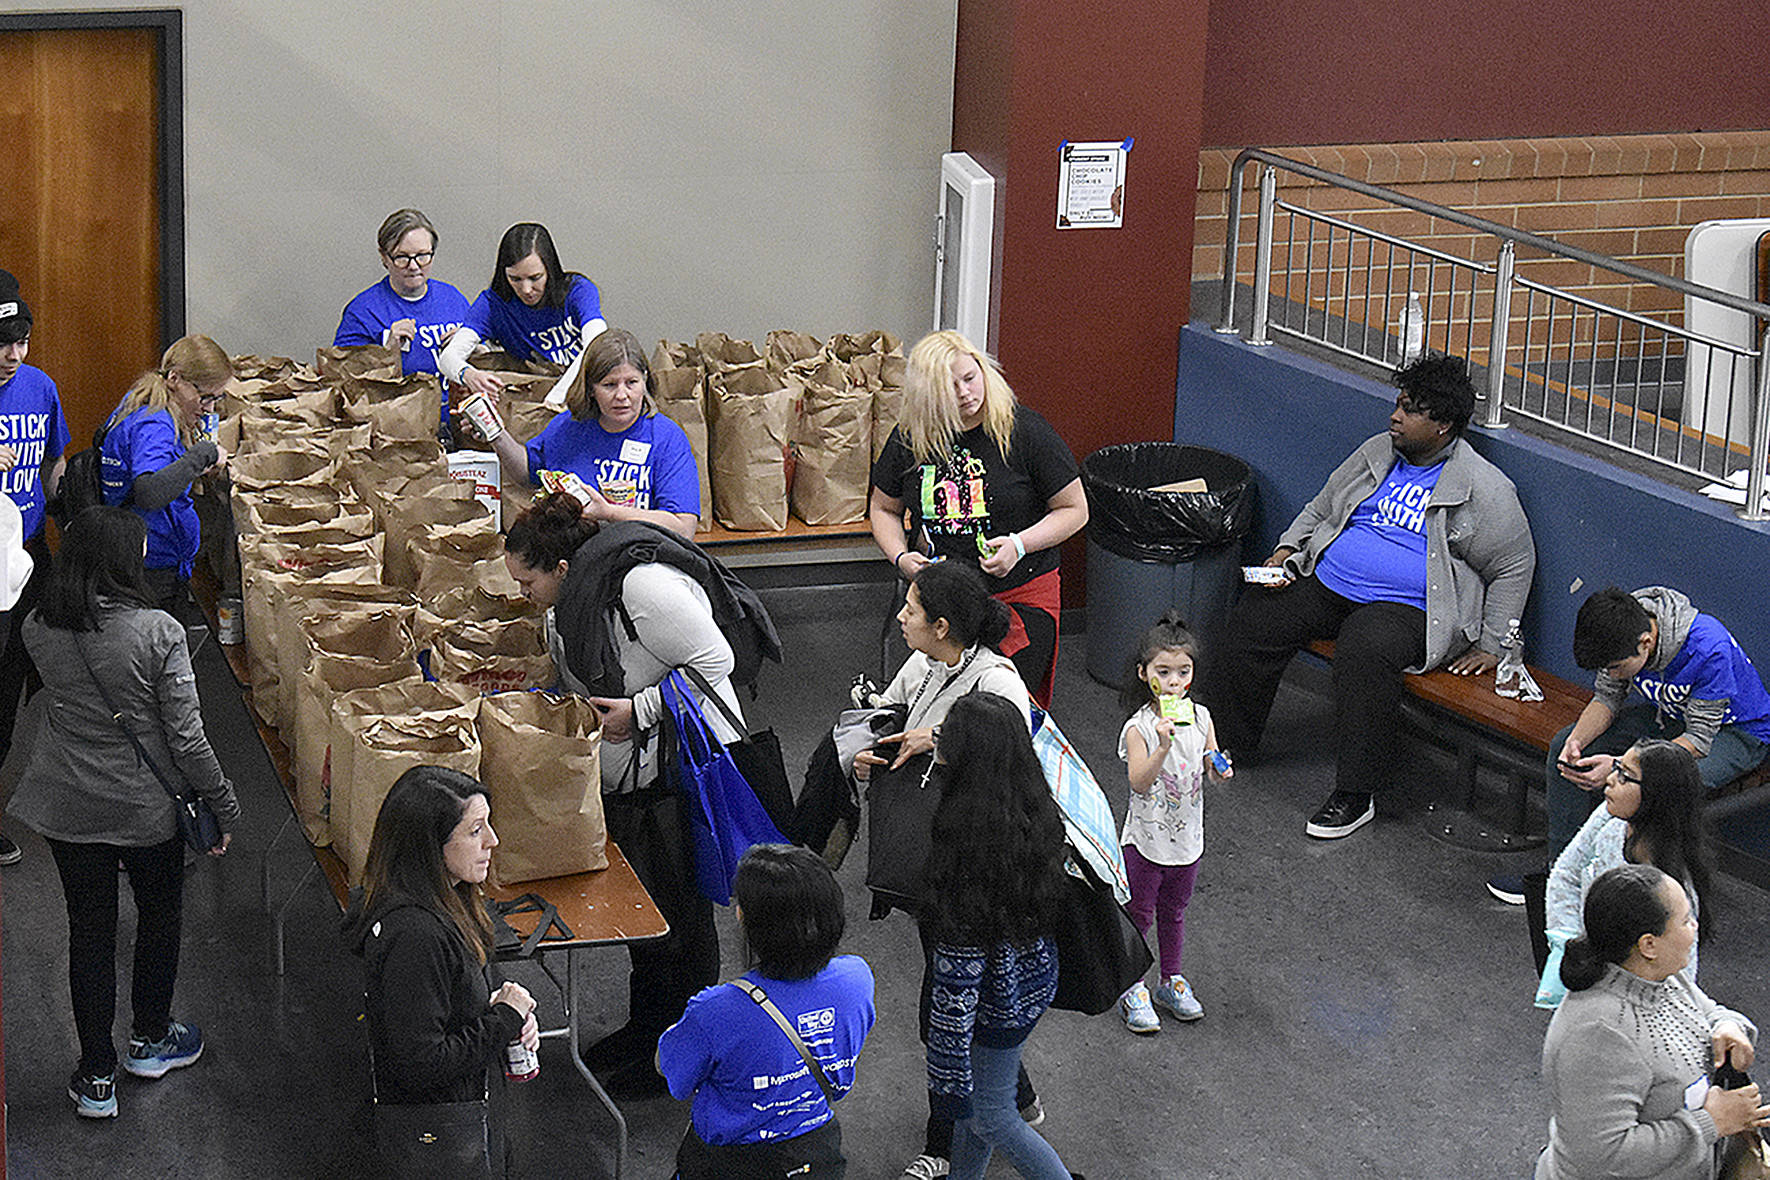 Photo by Haley Ausbun. United Way provided groceries and other donated goods at the Family Resource Exchange event on Martin Luther King Jr. Day, Jan. 20 at Lindbergh High School.